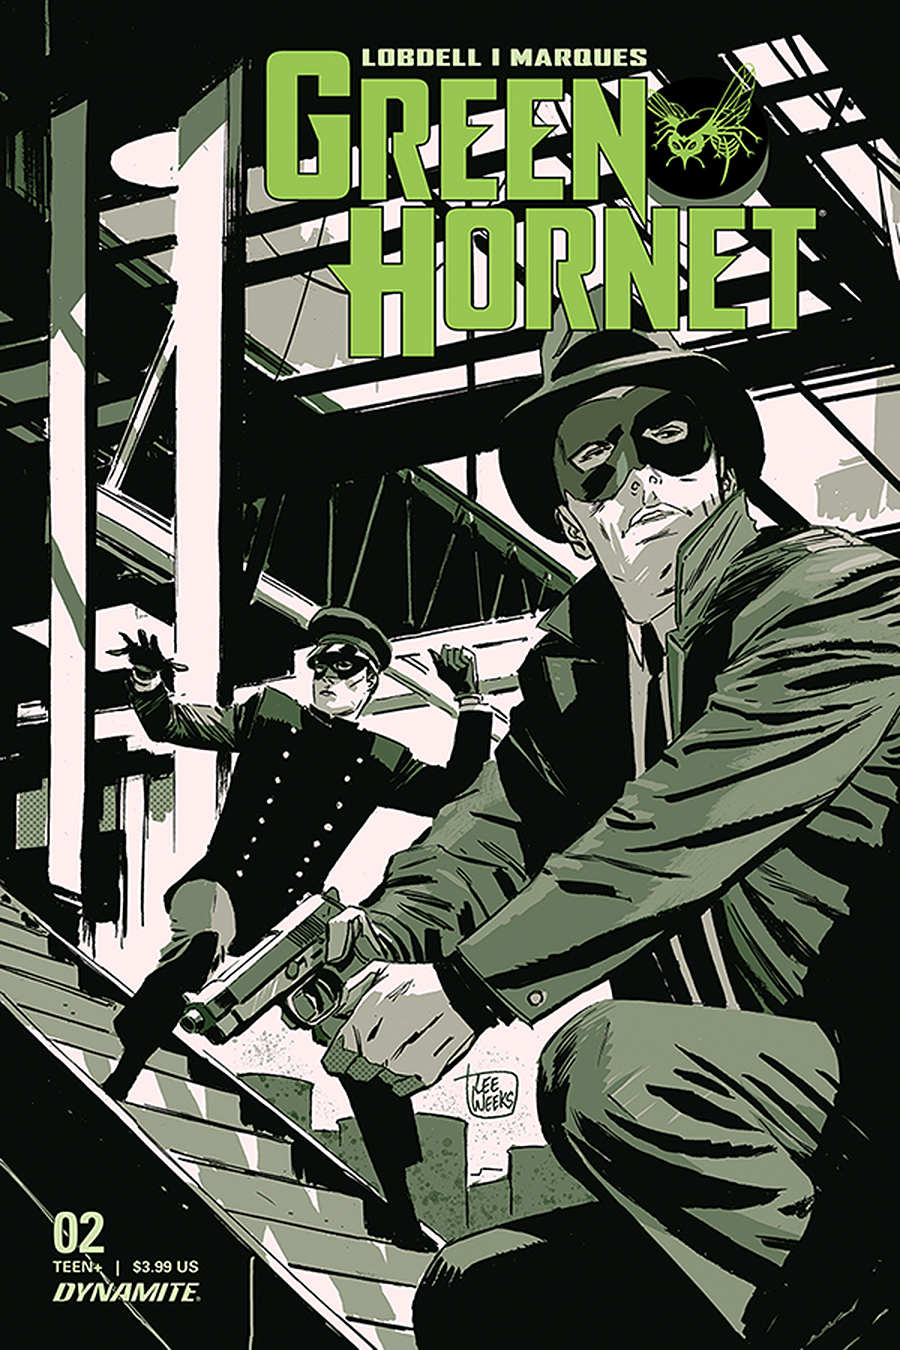 Green Hornet #4 Cover A Weeks